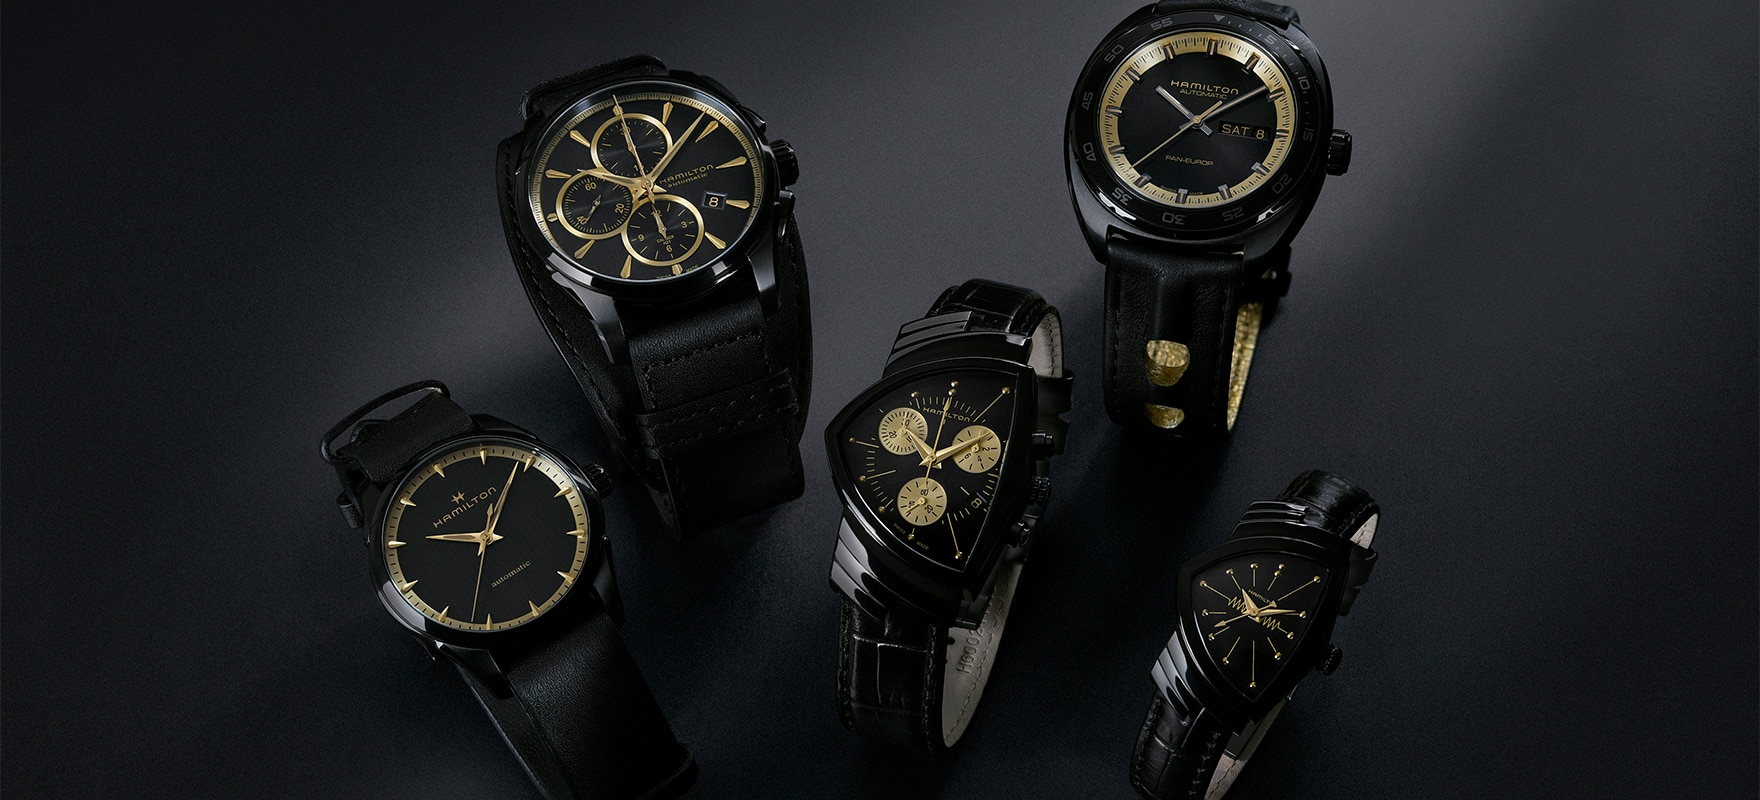 hamilton-launches-black-and-gold-collection-–-first-class-watches-blog